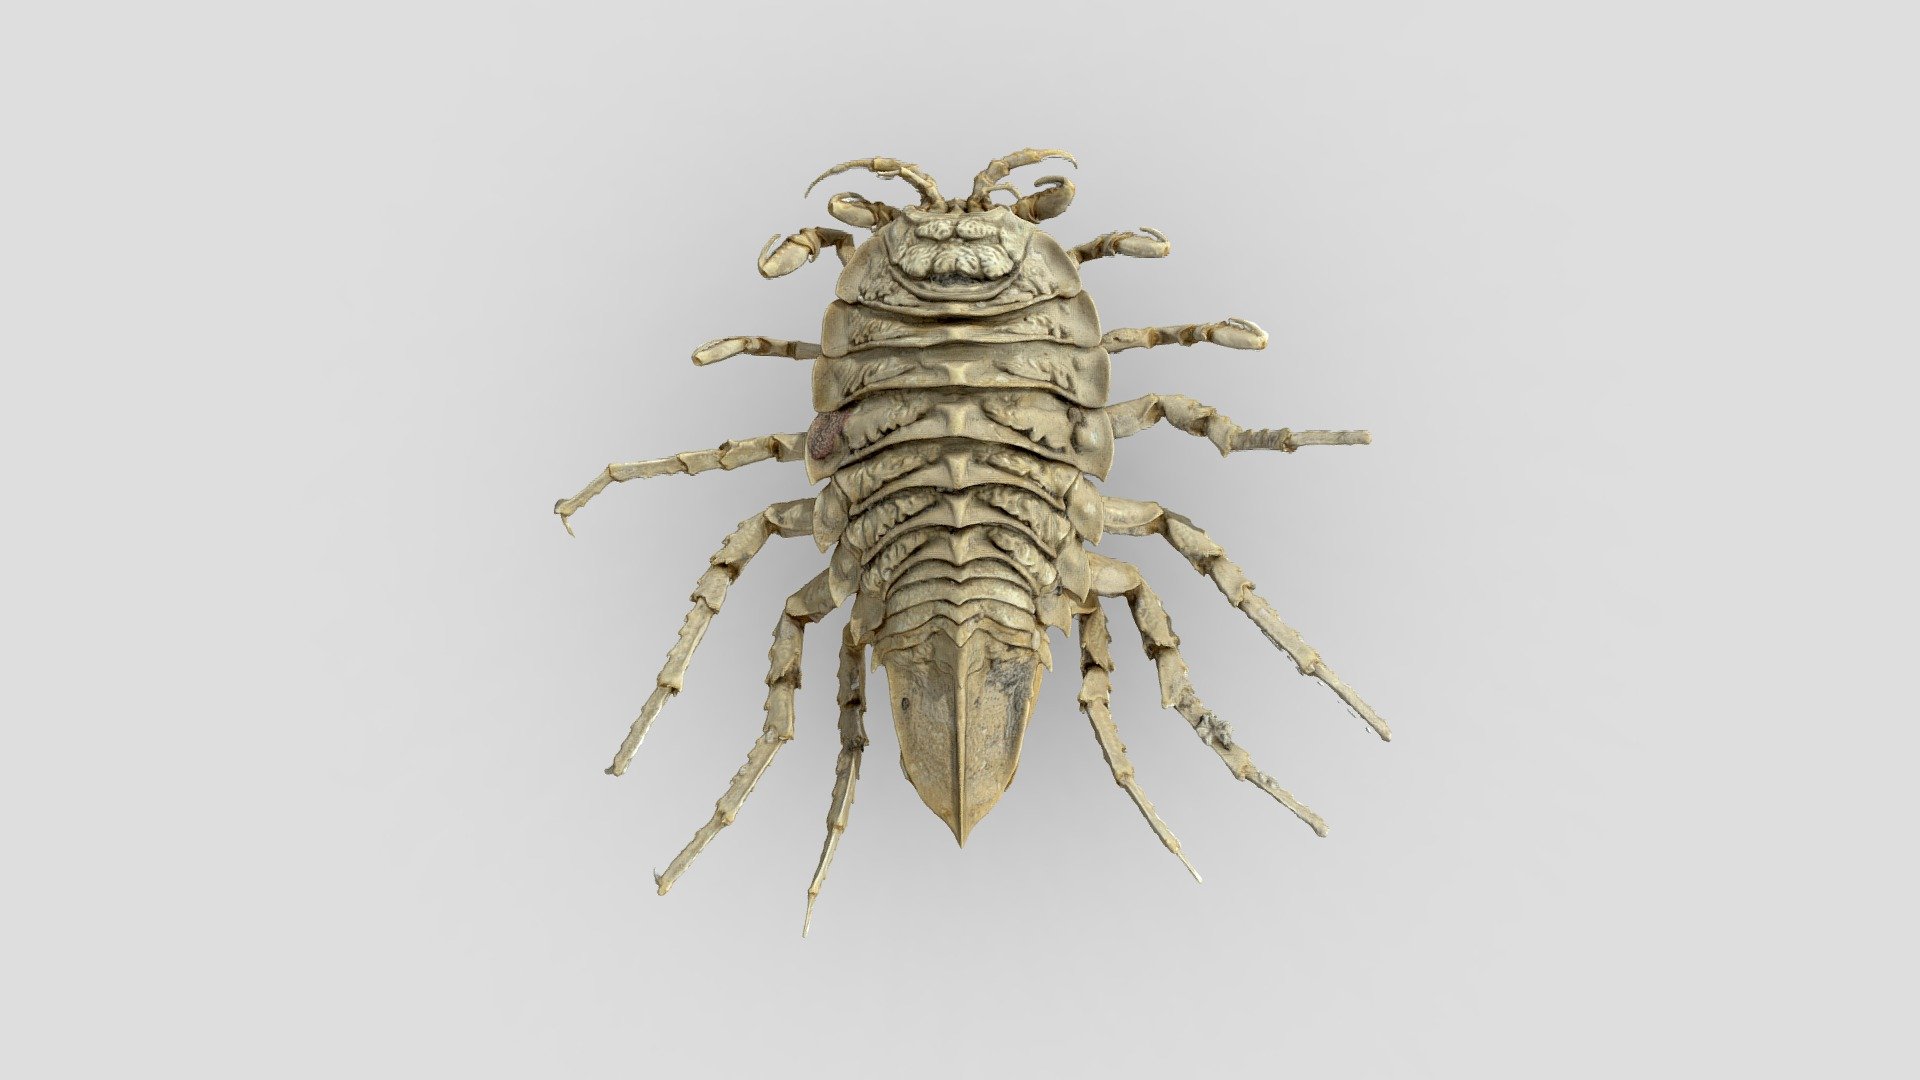 Glyptonotus antarcticus Eights, 1852  is a benthic marine isopod crustacean in the suborder Valvifera. This relatively large isopod is found in the Southern Ocean around Antarctica. This 3D model is from a specimen (MNA-02712) collected in the framework of the National Science Foundation (NSF) ICEFISH 2004 cruise.

G. antarcticus is a powerful carnivore and scavenger, an ecological role that brings this species to be caught in baited traps. It capable of active swimming, which is performed in an upside-down position.

Eggs and young are brooded for more than one year in the female's marsupium  formed by a series of specisalized appendages (oostegites). Here the eggs are nourished by a maternal secretion.

Respiratory chamber is located ventrally to the pleotelson, consisting in two leaf-like uropods, that ventilate the animal; also pleopods, thin and flattened, help the respiratory processes with continuous movements 3d model